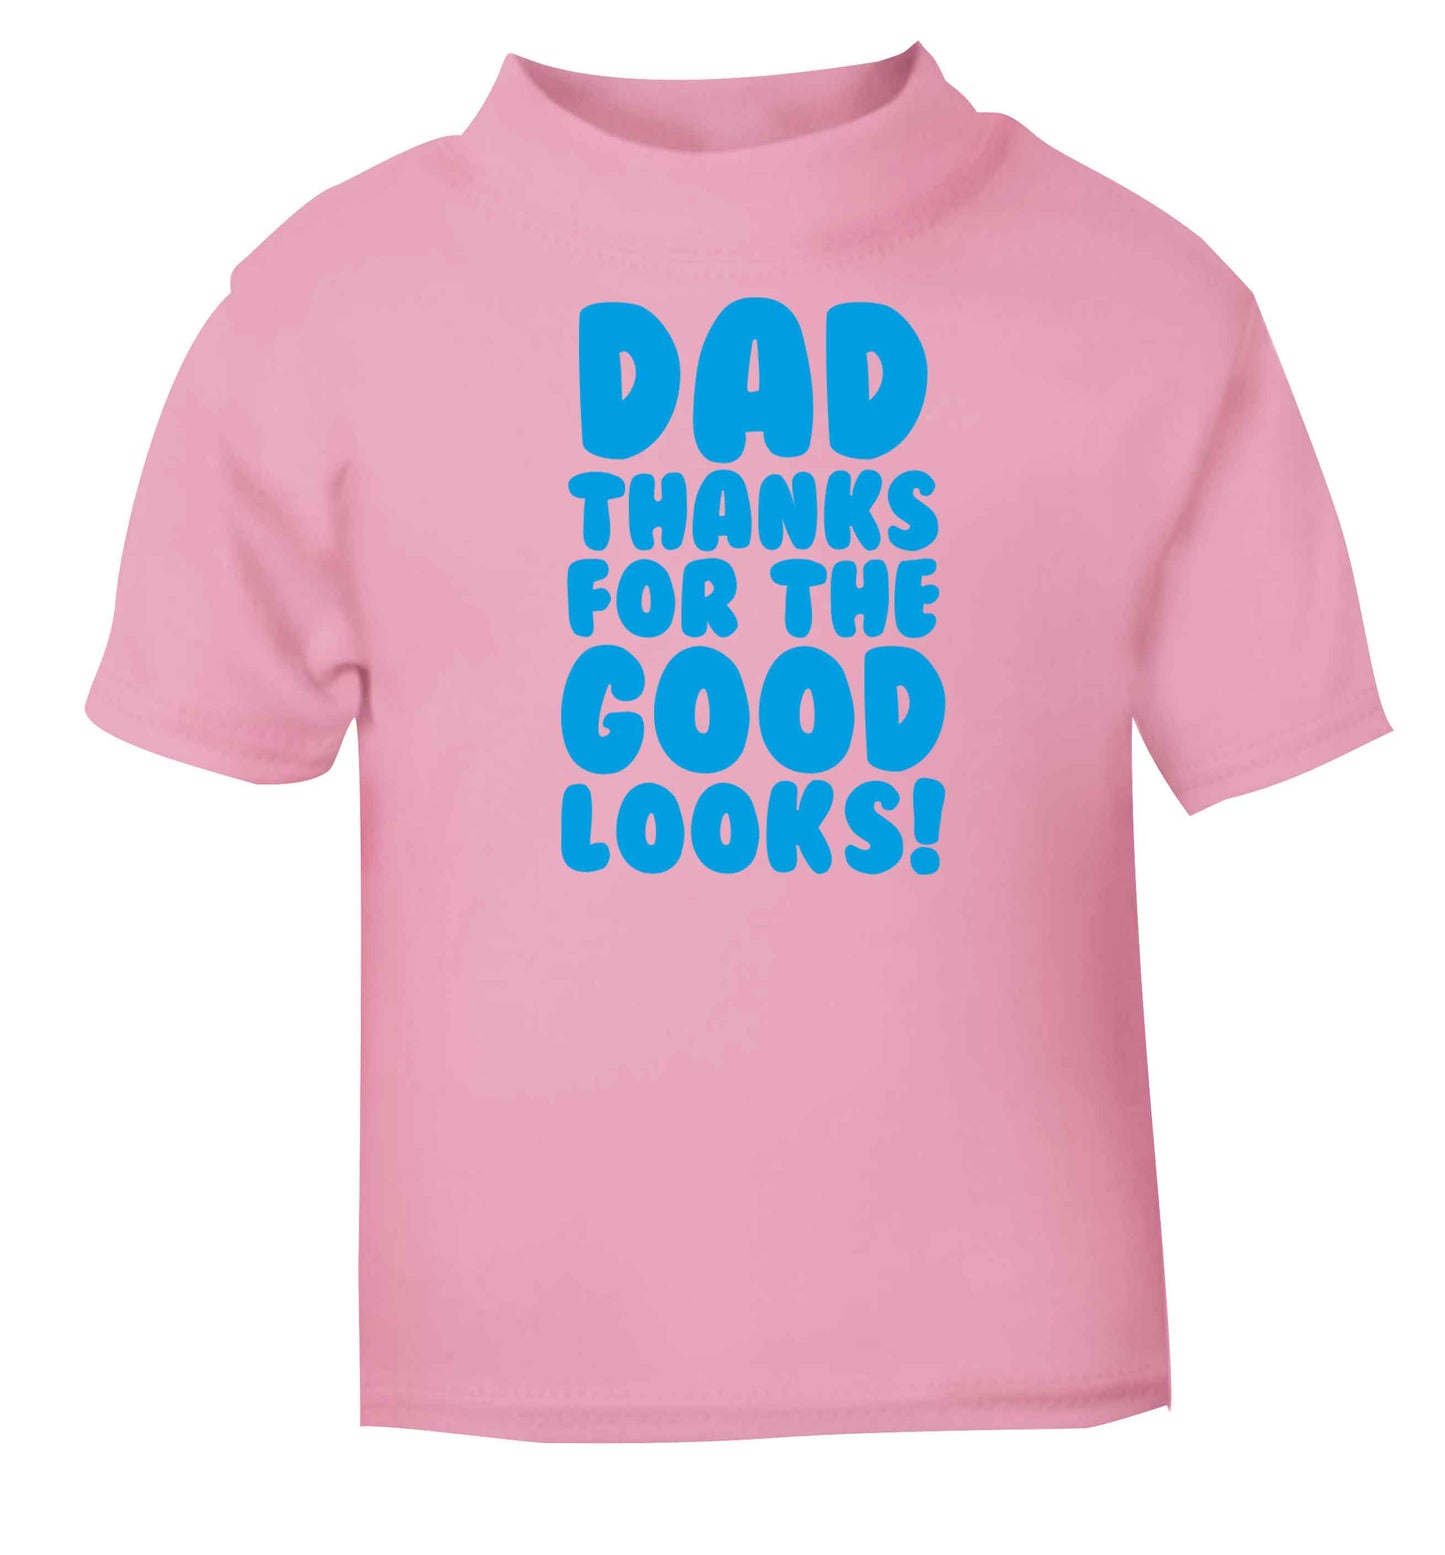 Dad thanks for the good looks light pink baby toddler Tshirt 2 Years